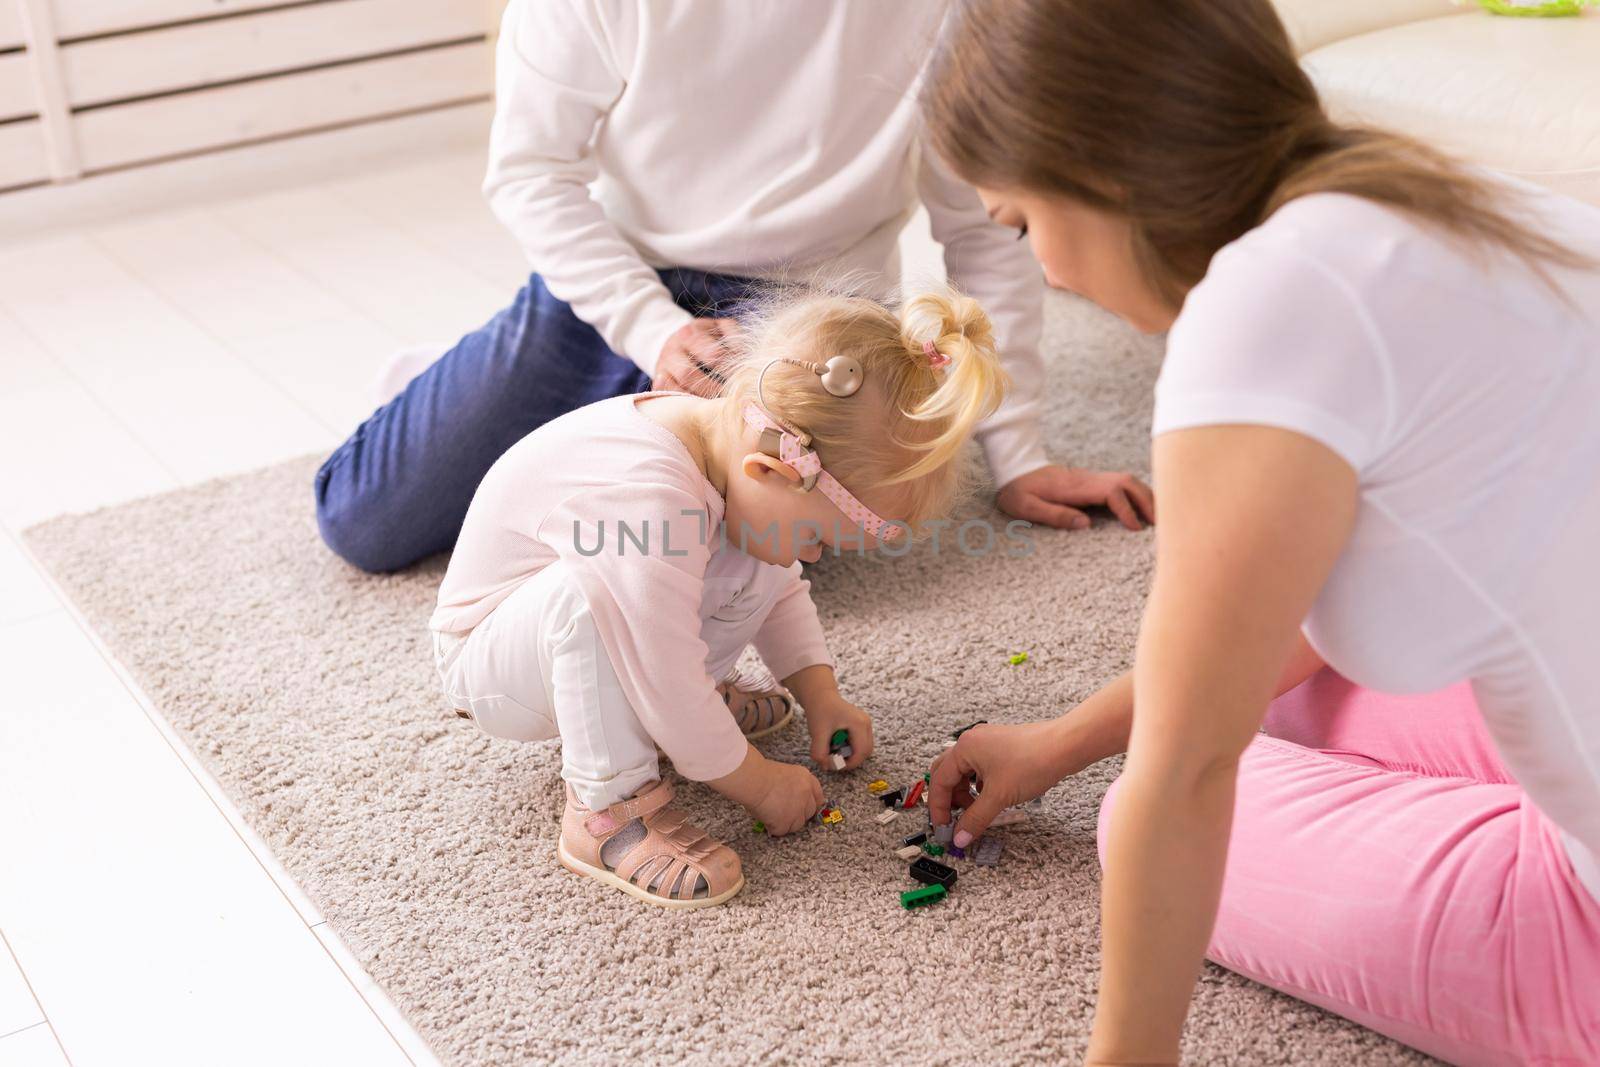 Baby child with hearing aids and cochlear implants plays with parents on floor. Deaf and rehabilitation